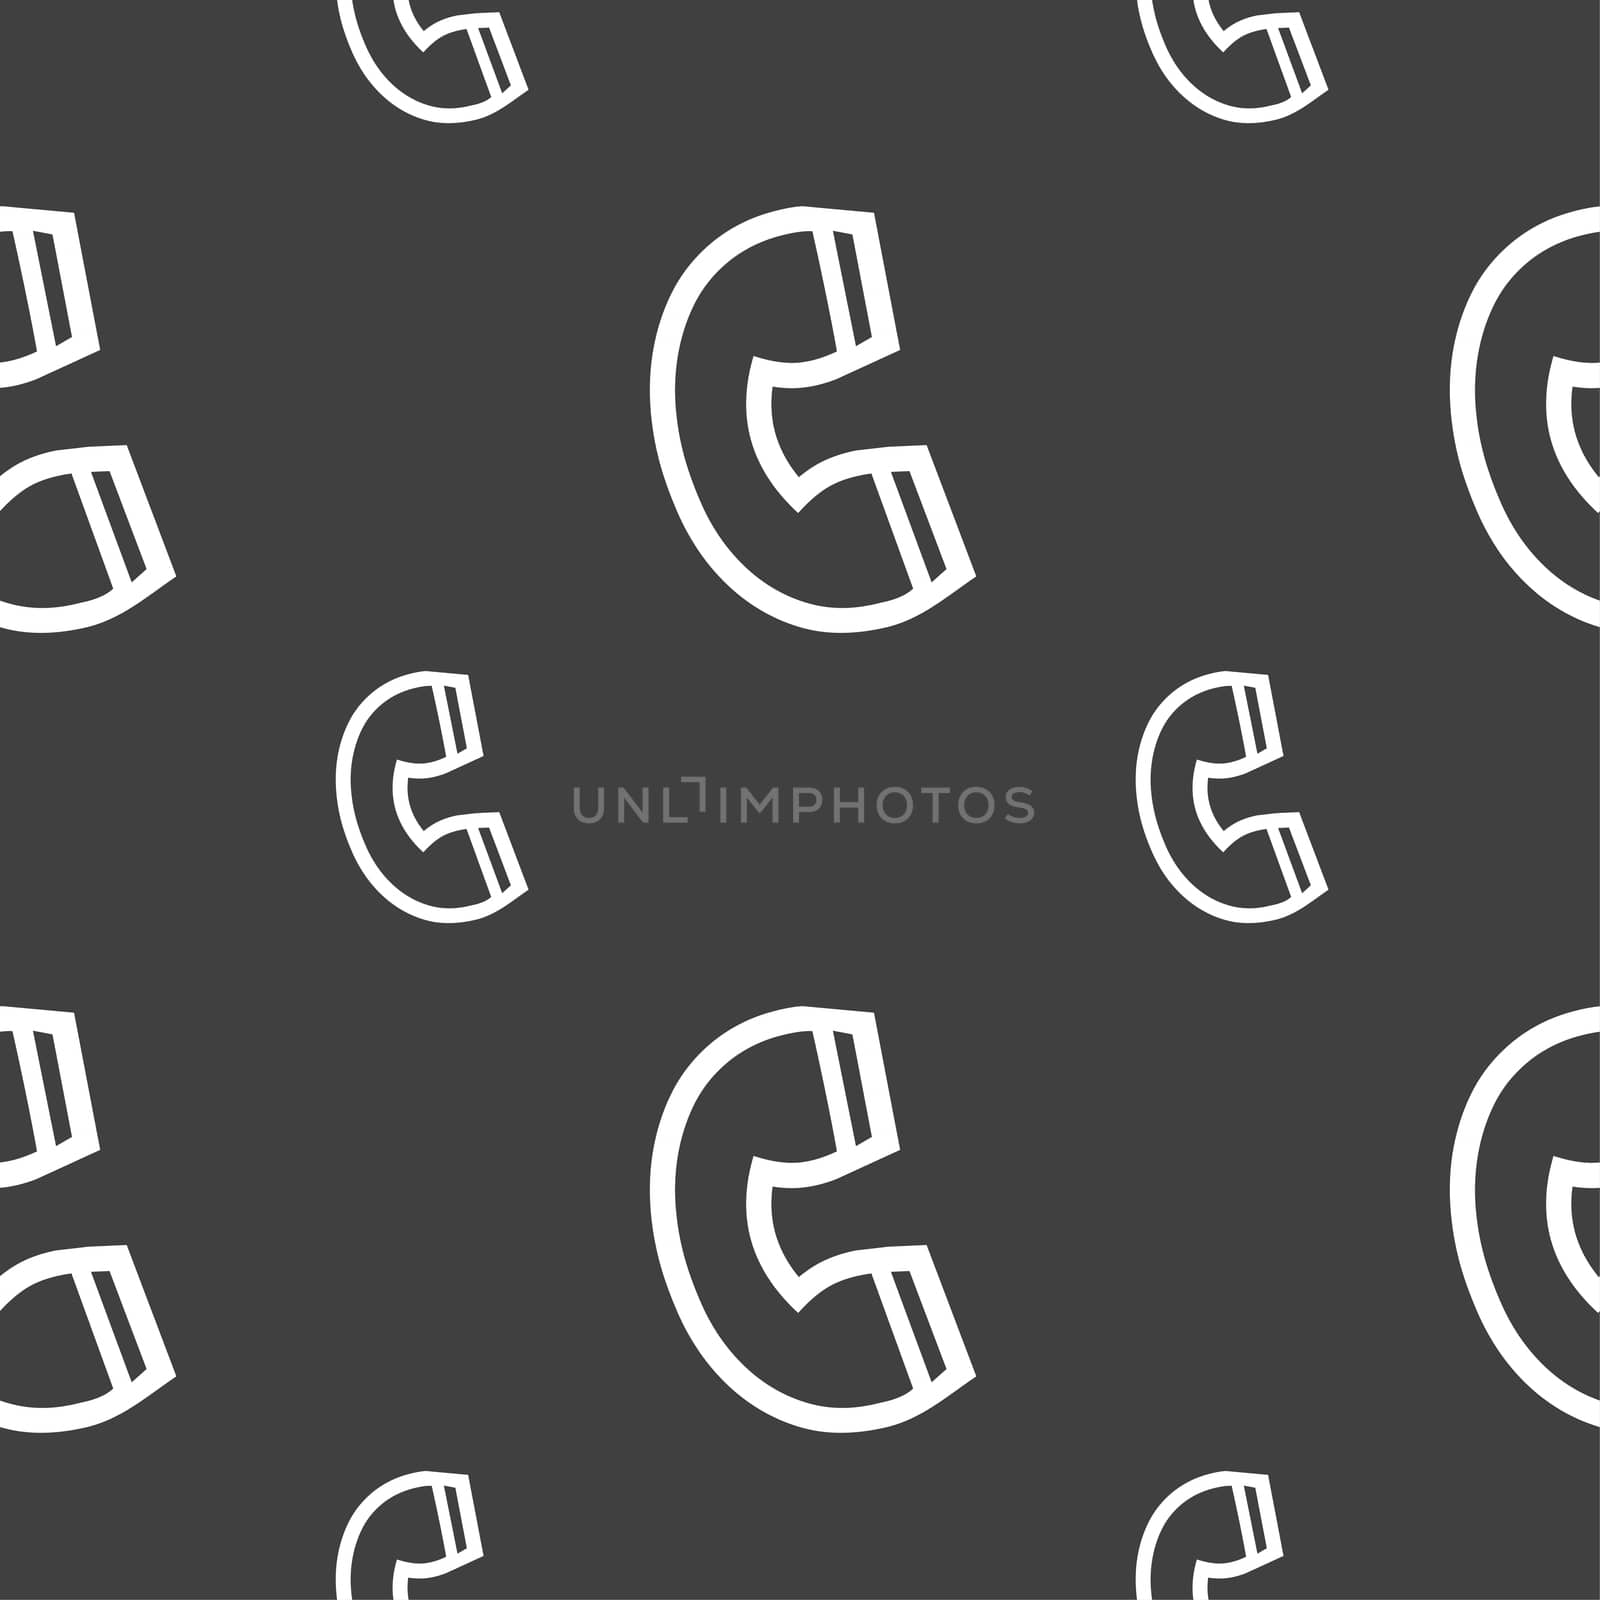 handset icon sign. Seamless pattern on a gray background. illustration